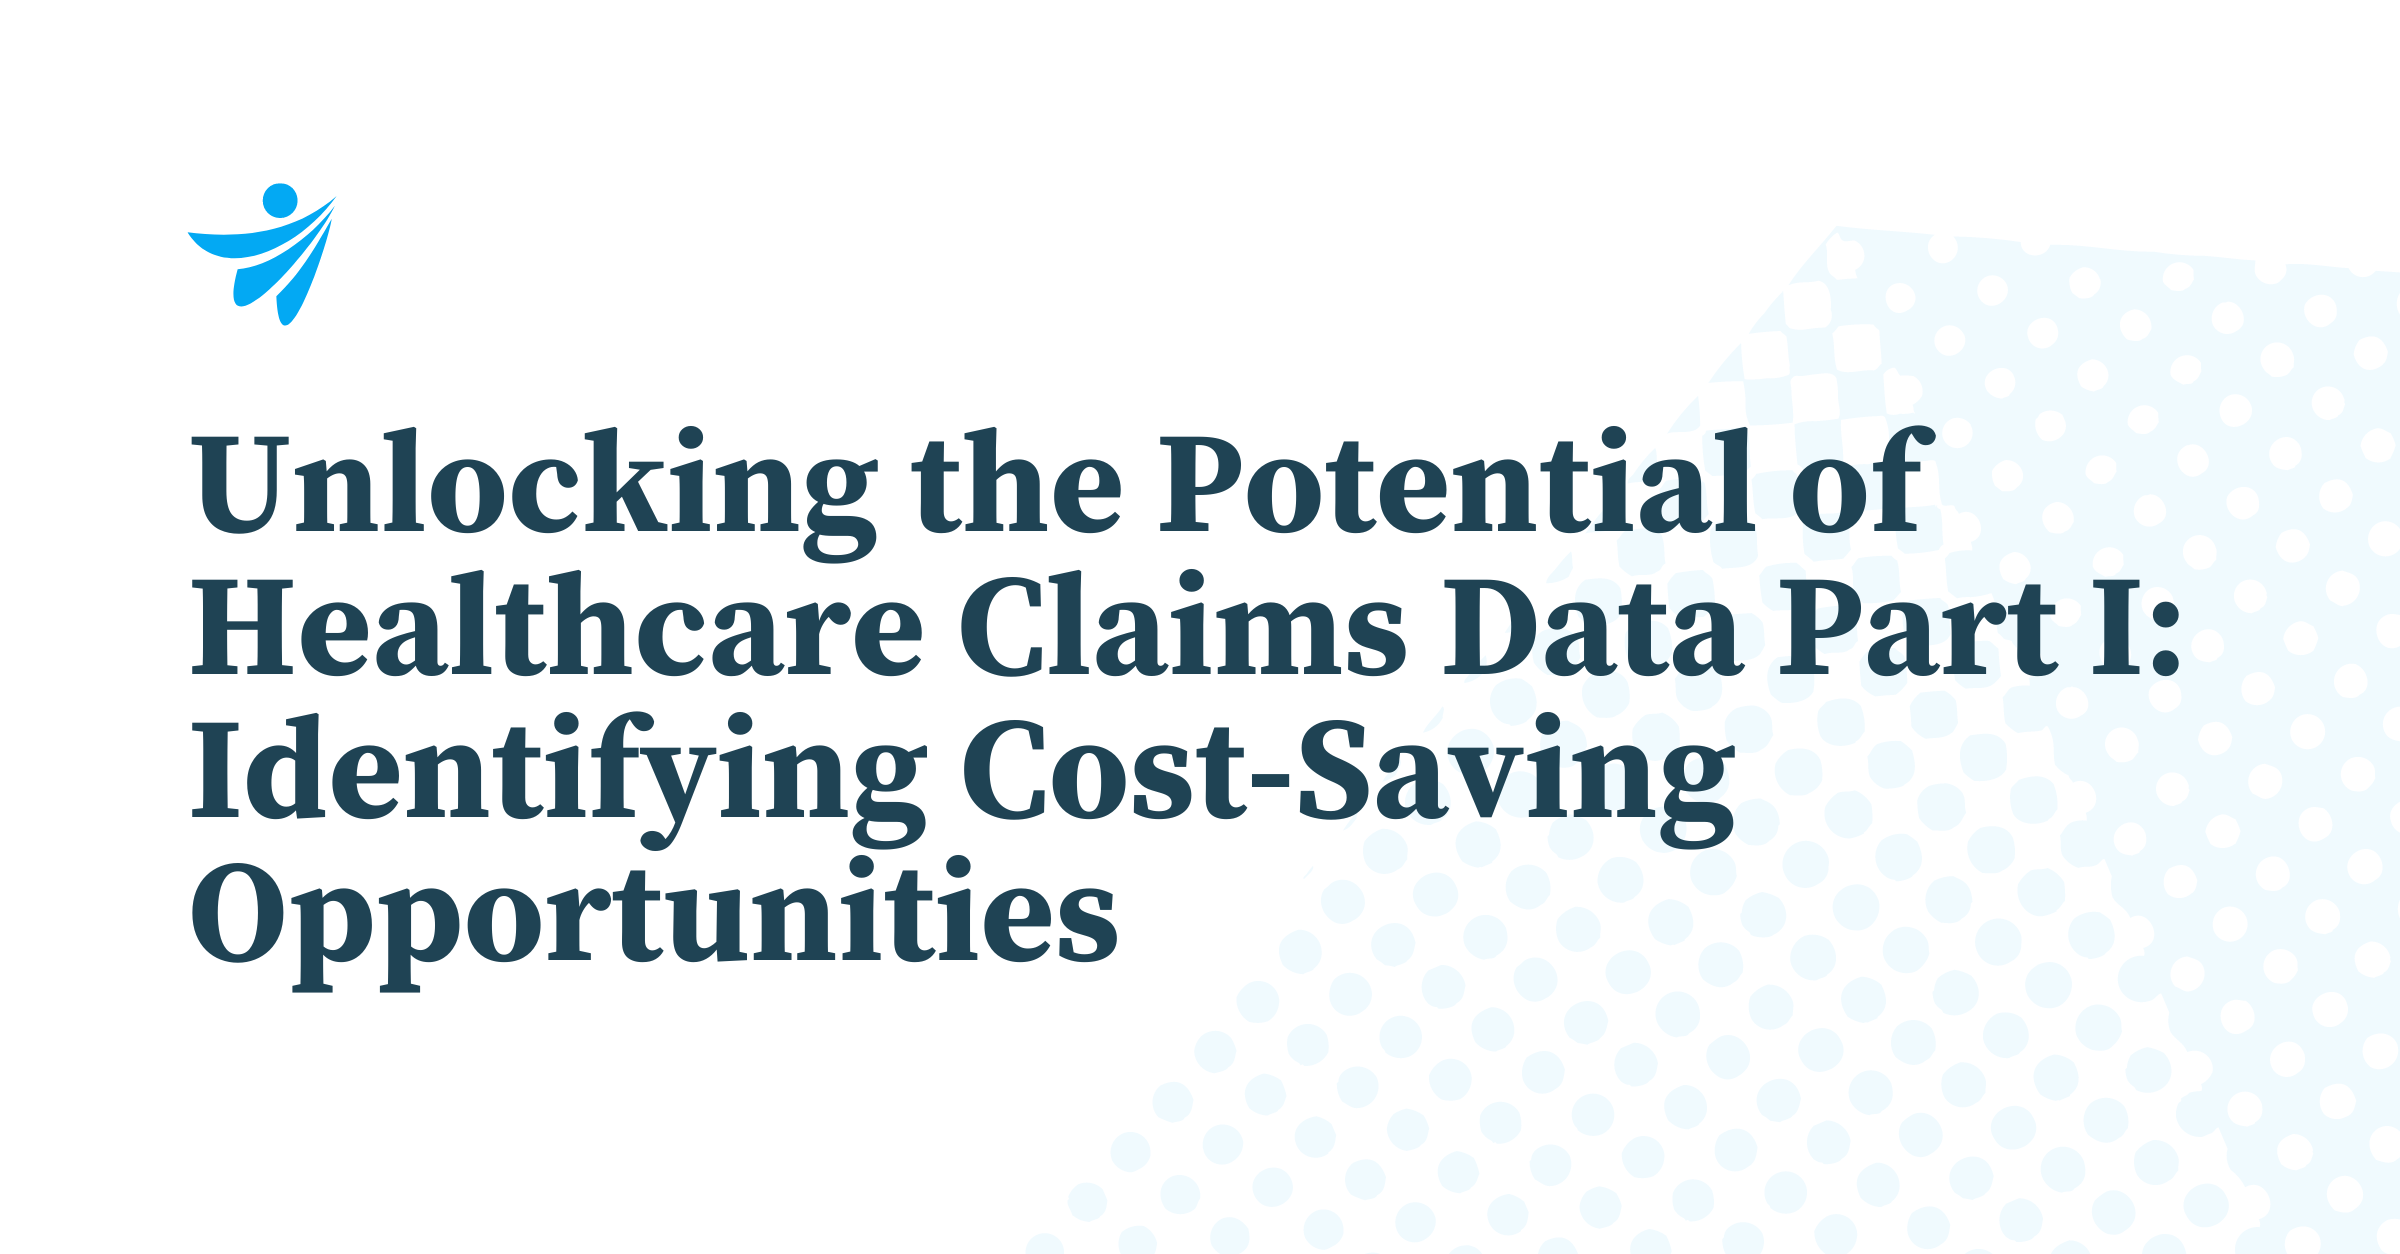 Thumbnail for Unlocking the Potential of Healthcare Claims Data Part I: Identifying Cost-Saving Opportunities 